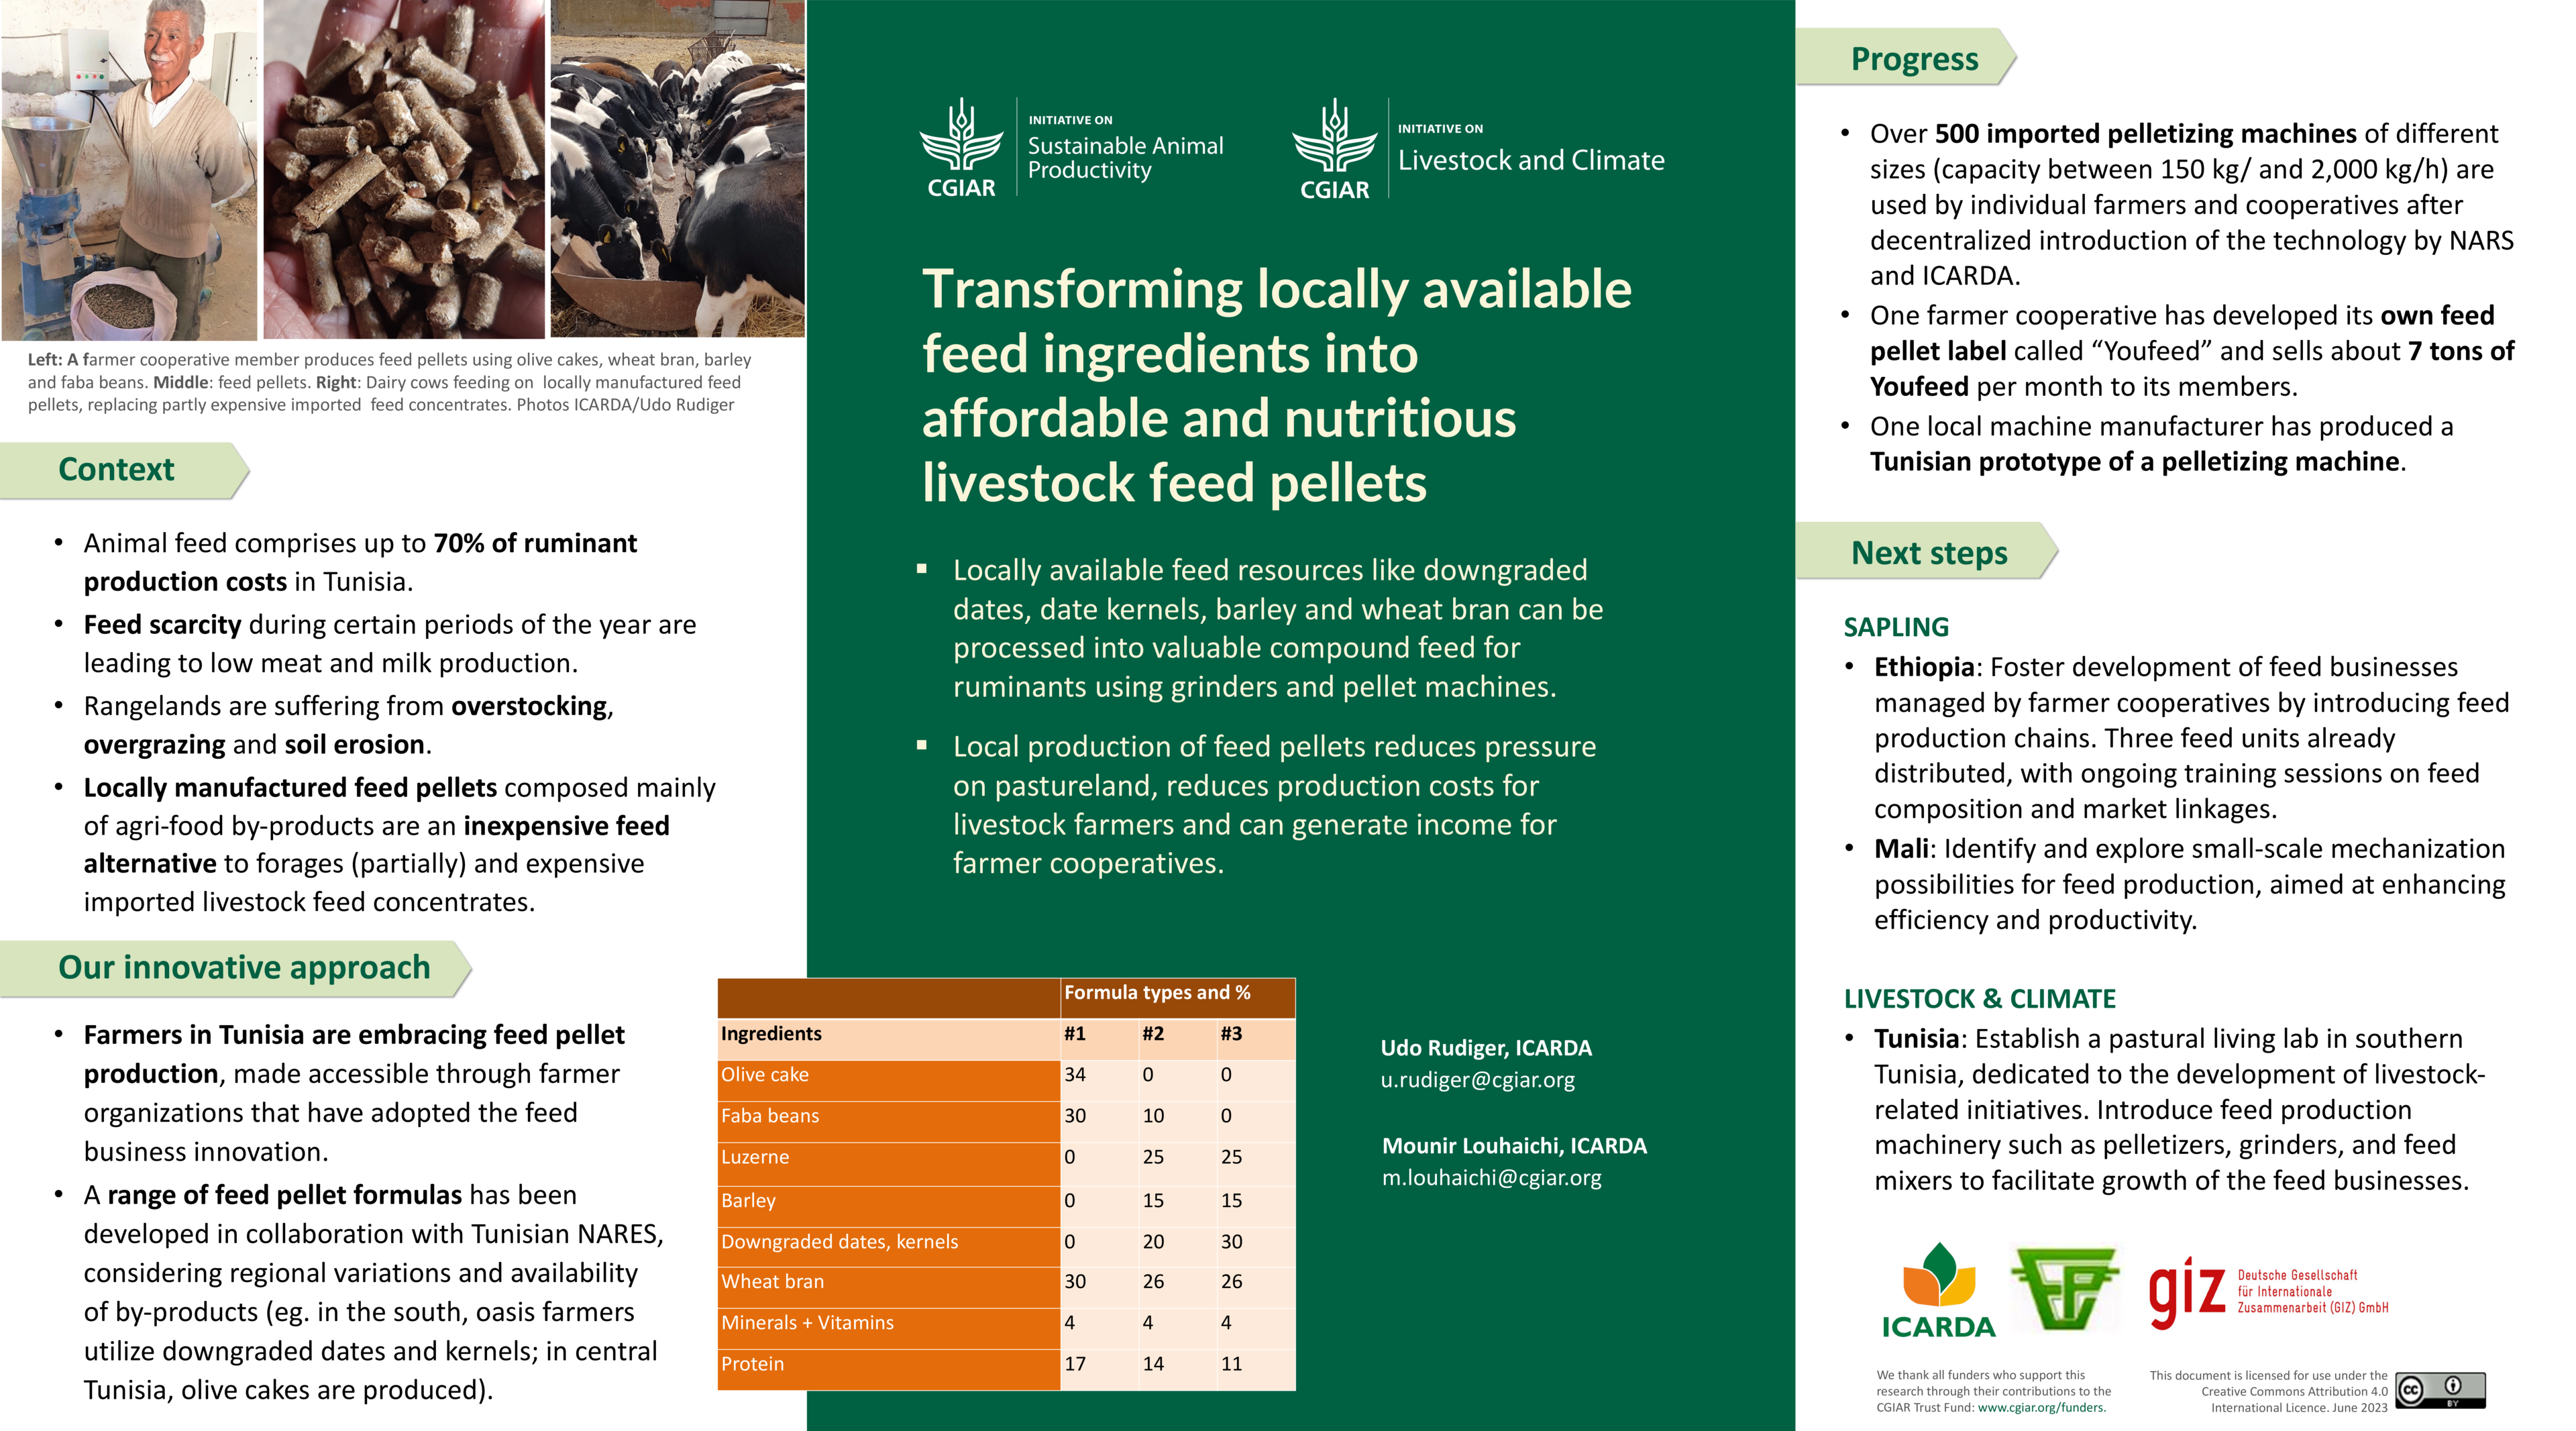 Transforming locally available feed ingredients into affordable and nutritious livestock feed pellets